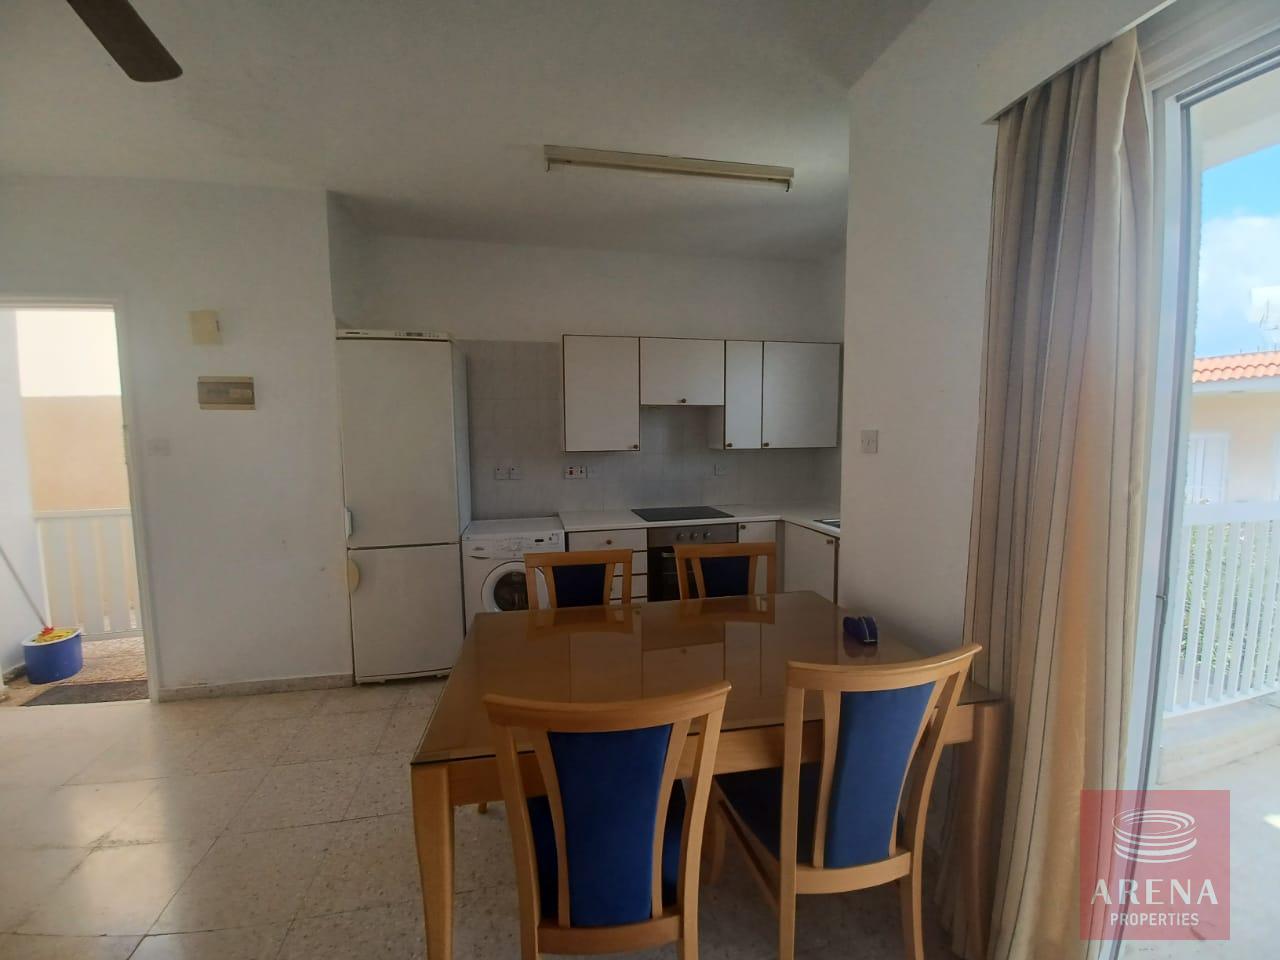 1 bed flat in kapparis - dining area